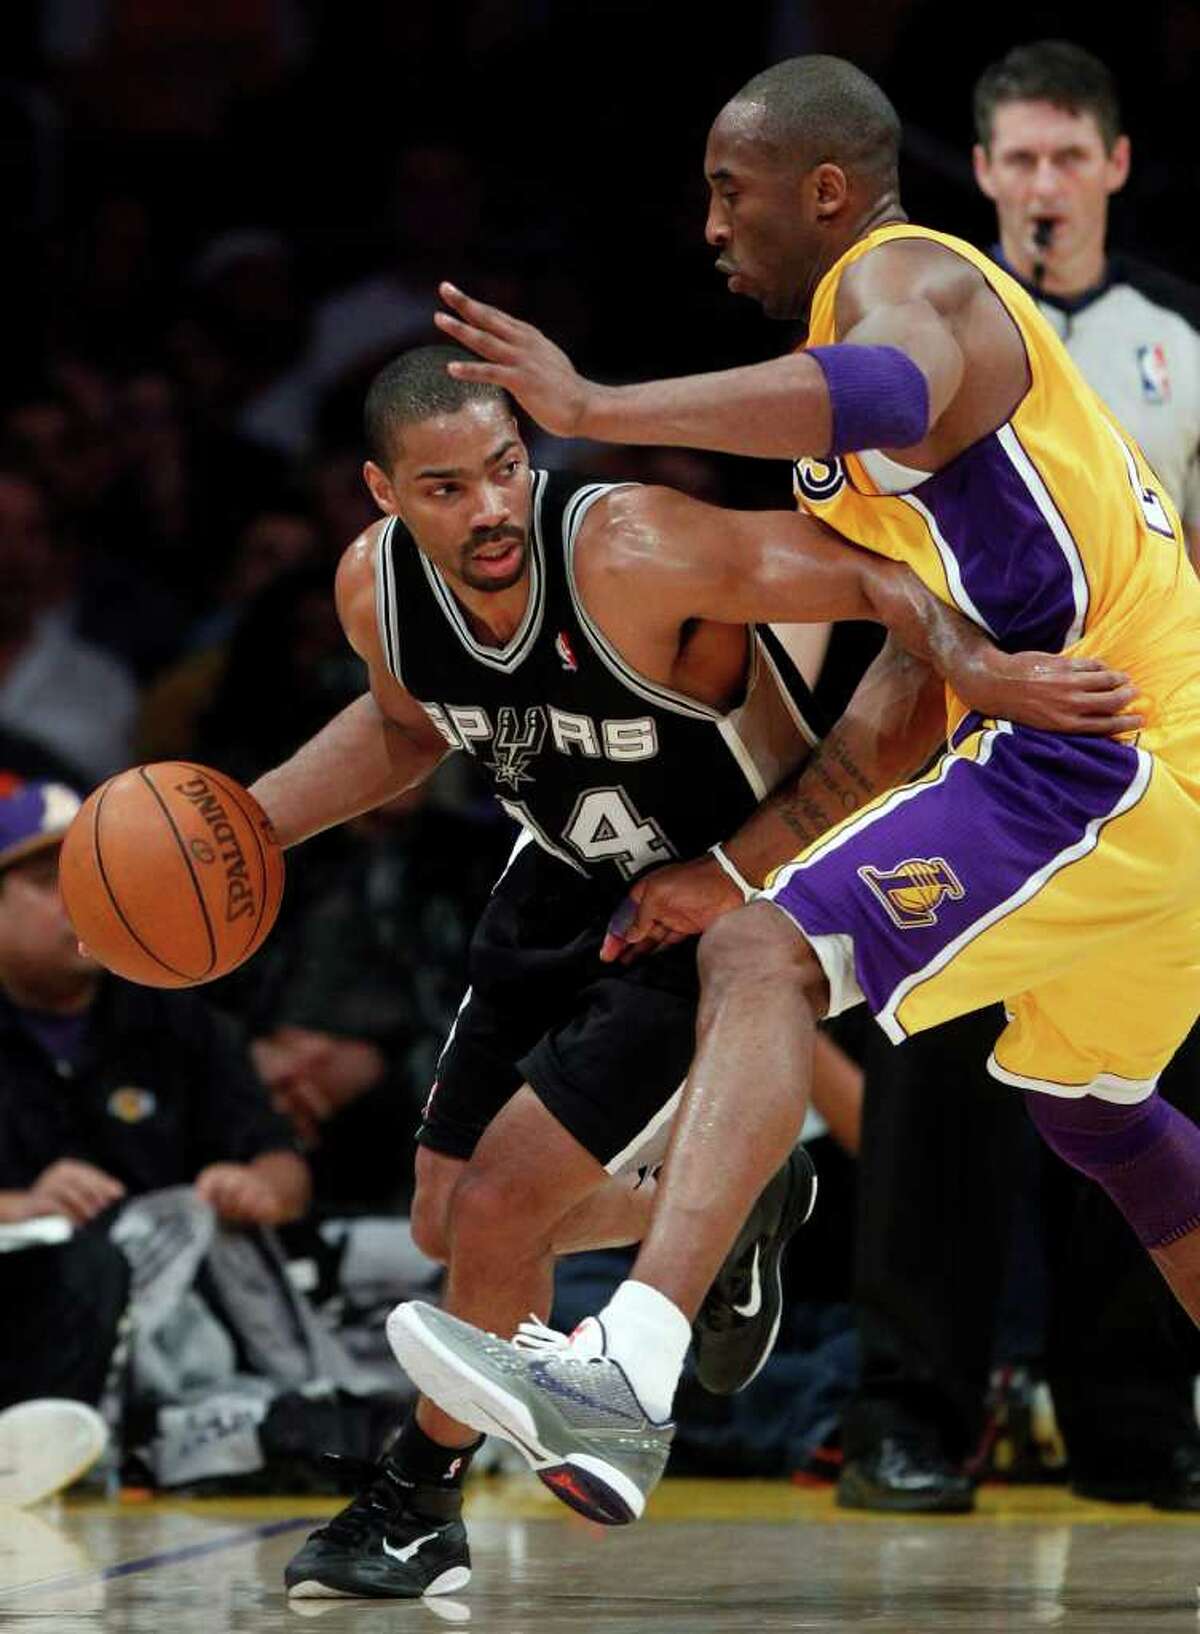 San Antonio Spurs' Gary Neal, left, drives around Los Angeles Lakers' Kobe Bryant during the first half of an NBA basketball game in Los Angeles, Tuesday, April 12, 2011.